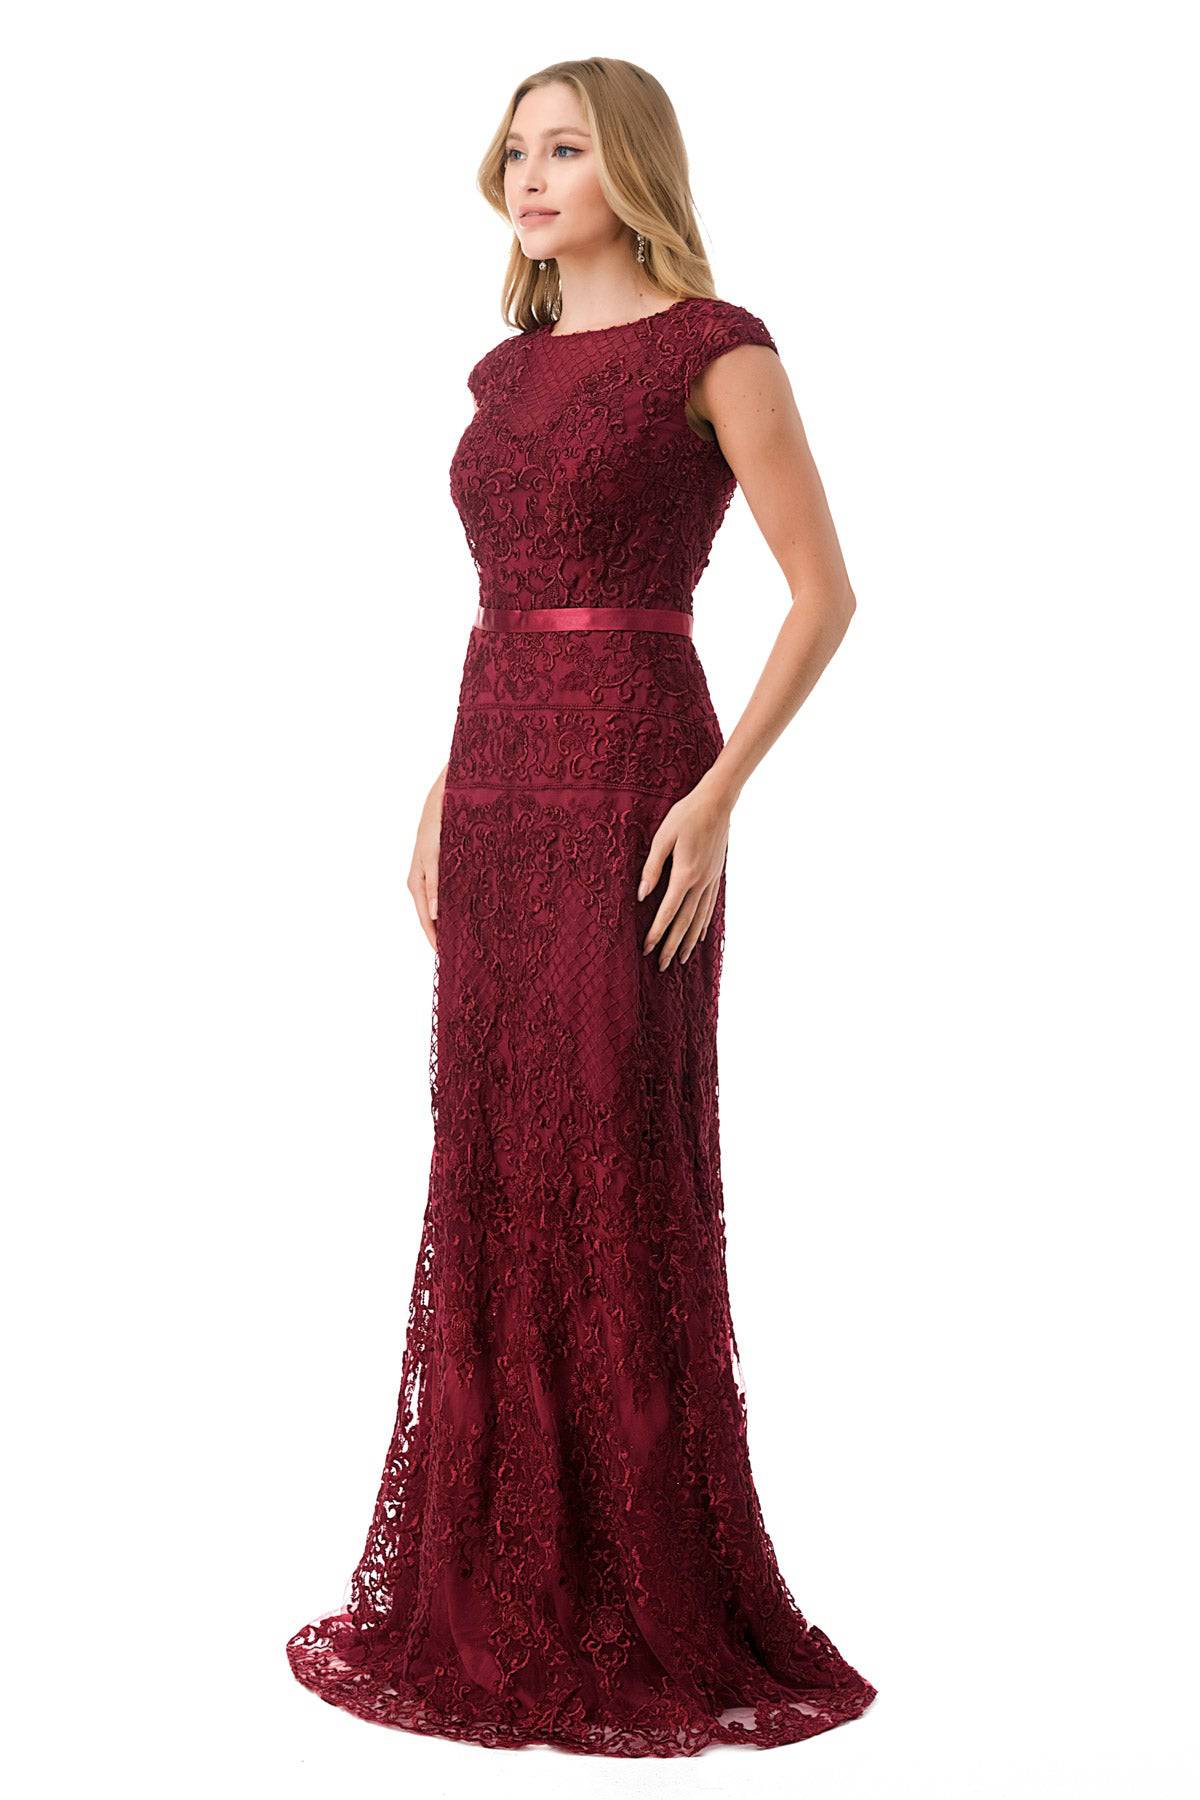 Aspeed M2732 Cap Sleeve Lace Embroidered Dress - NORMA REED